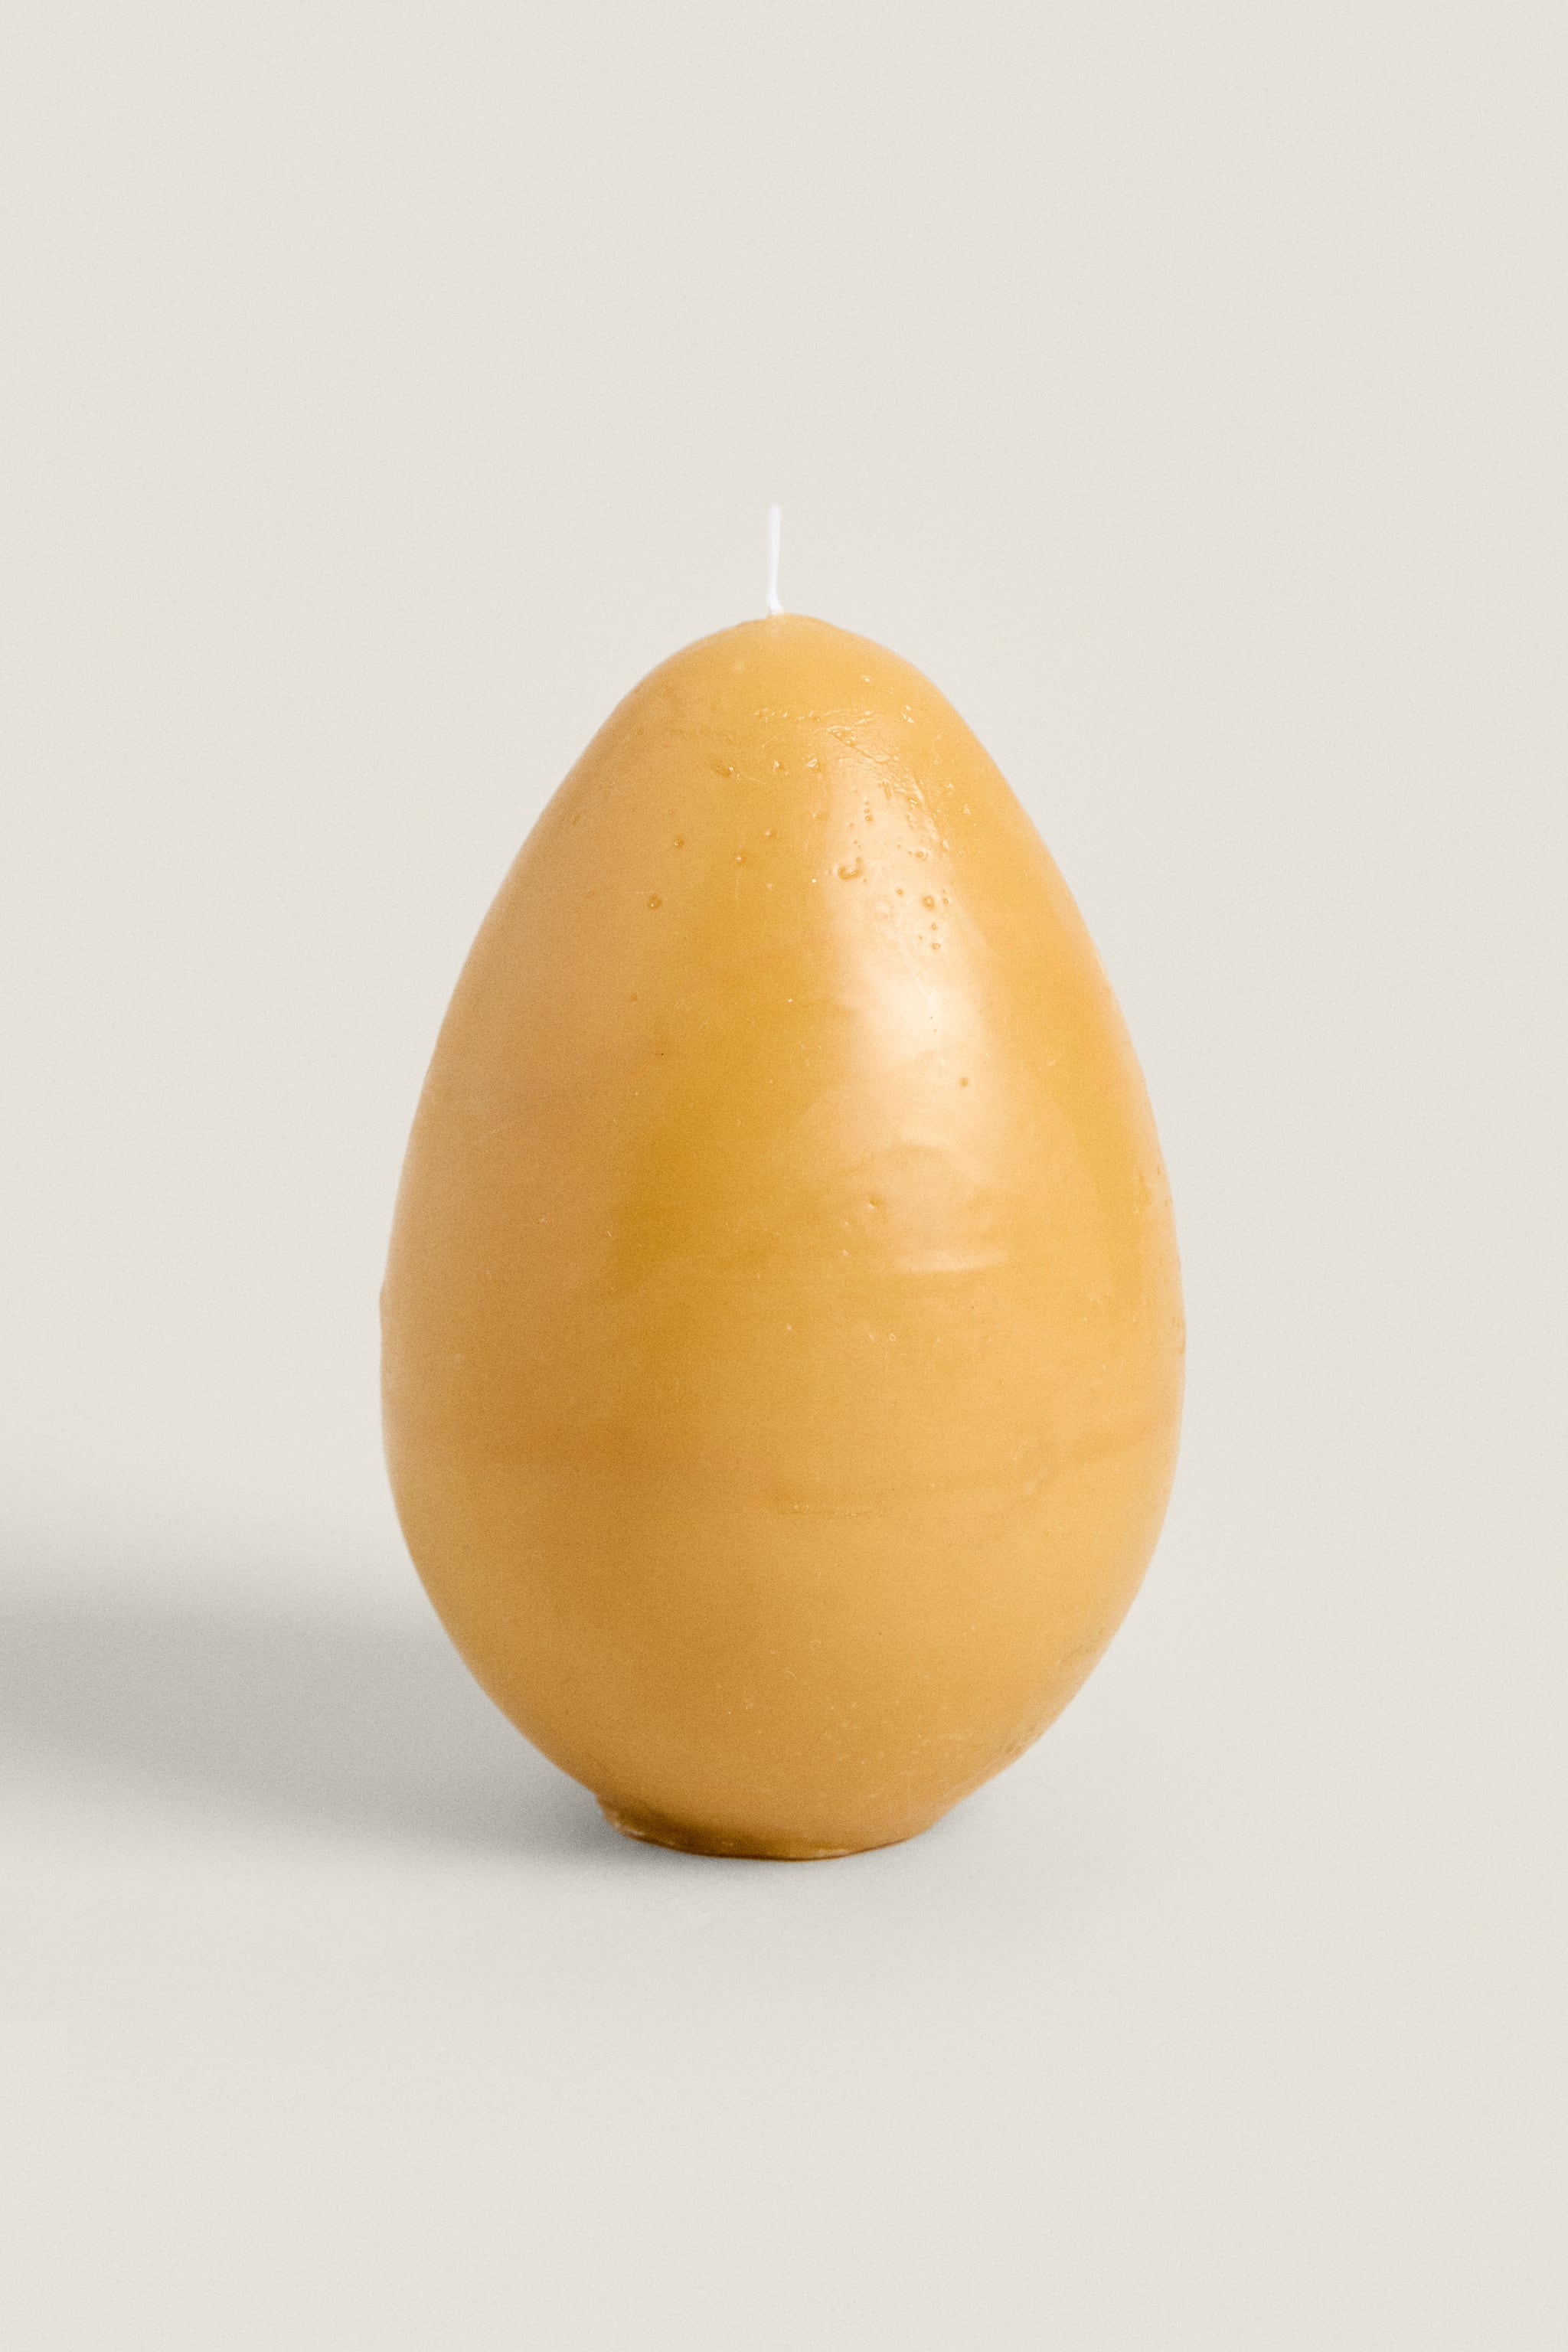 (980 G) EGG BEESWAX CANDLE